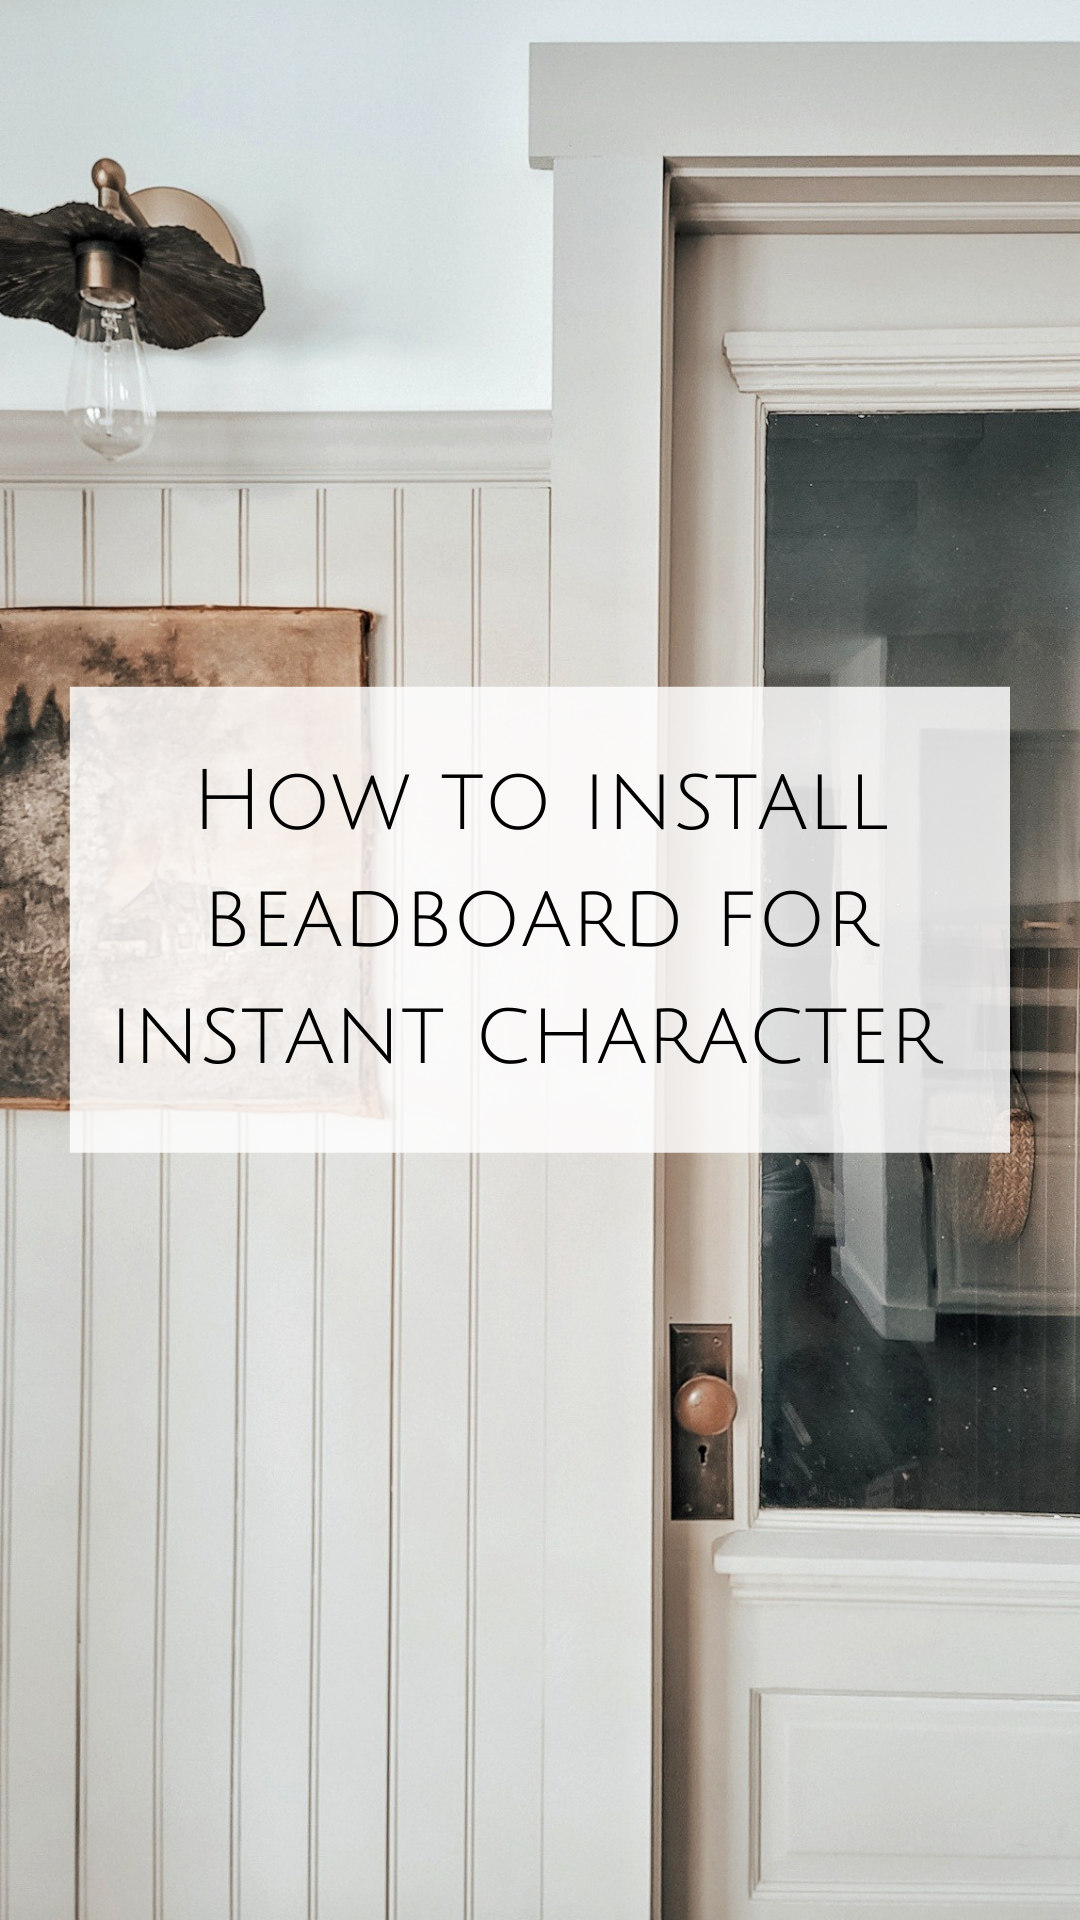 How to add bead board for instant character - Showit Blog